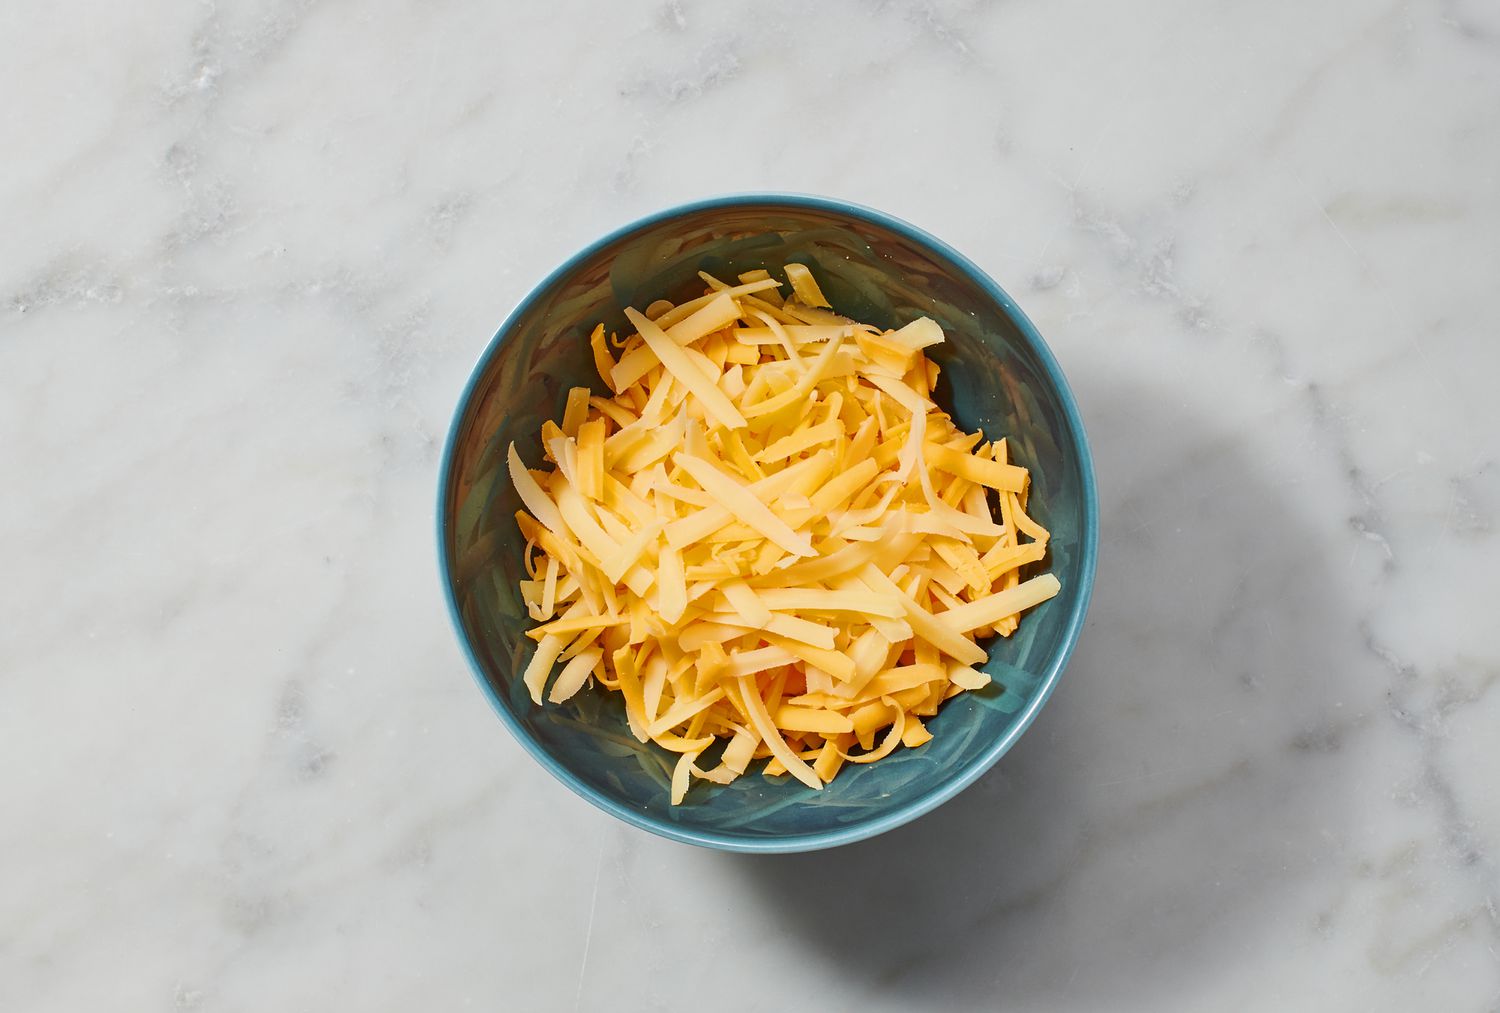 A small bowl of shredded cheese